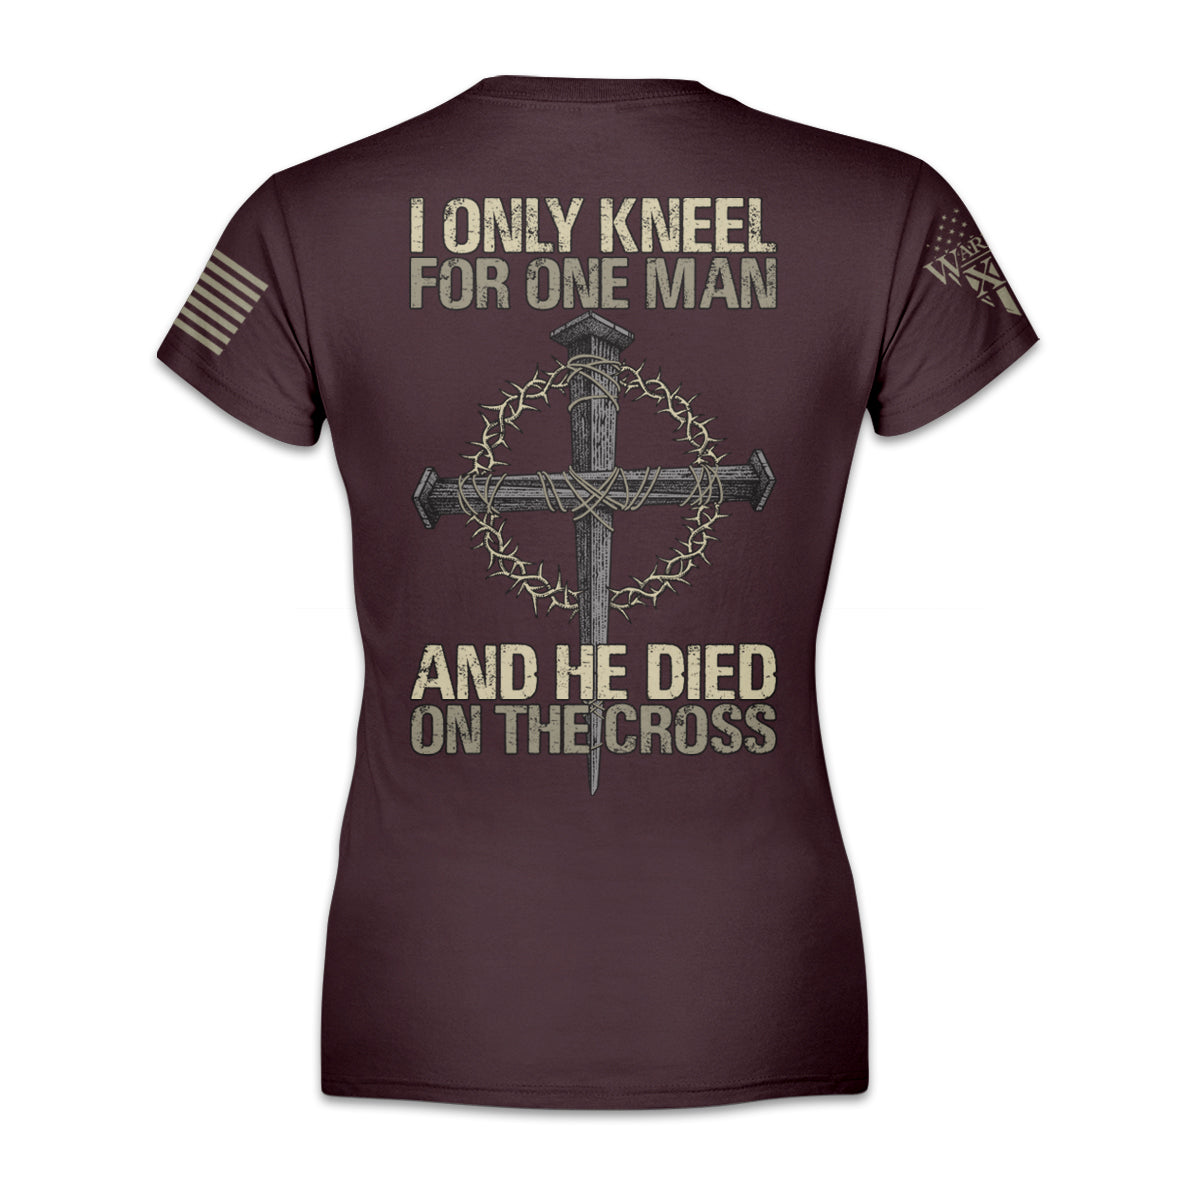 A burgundy women's relaxed fit shirt with the words "I only kneel for one man, and he died on the cross" with a cross printed on the back of the shirt.